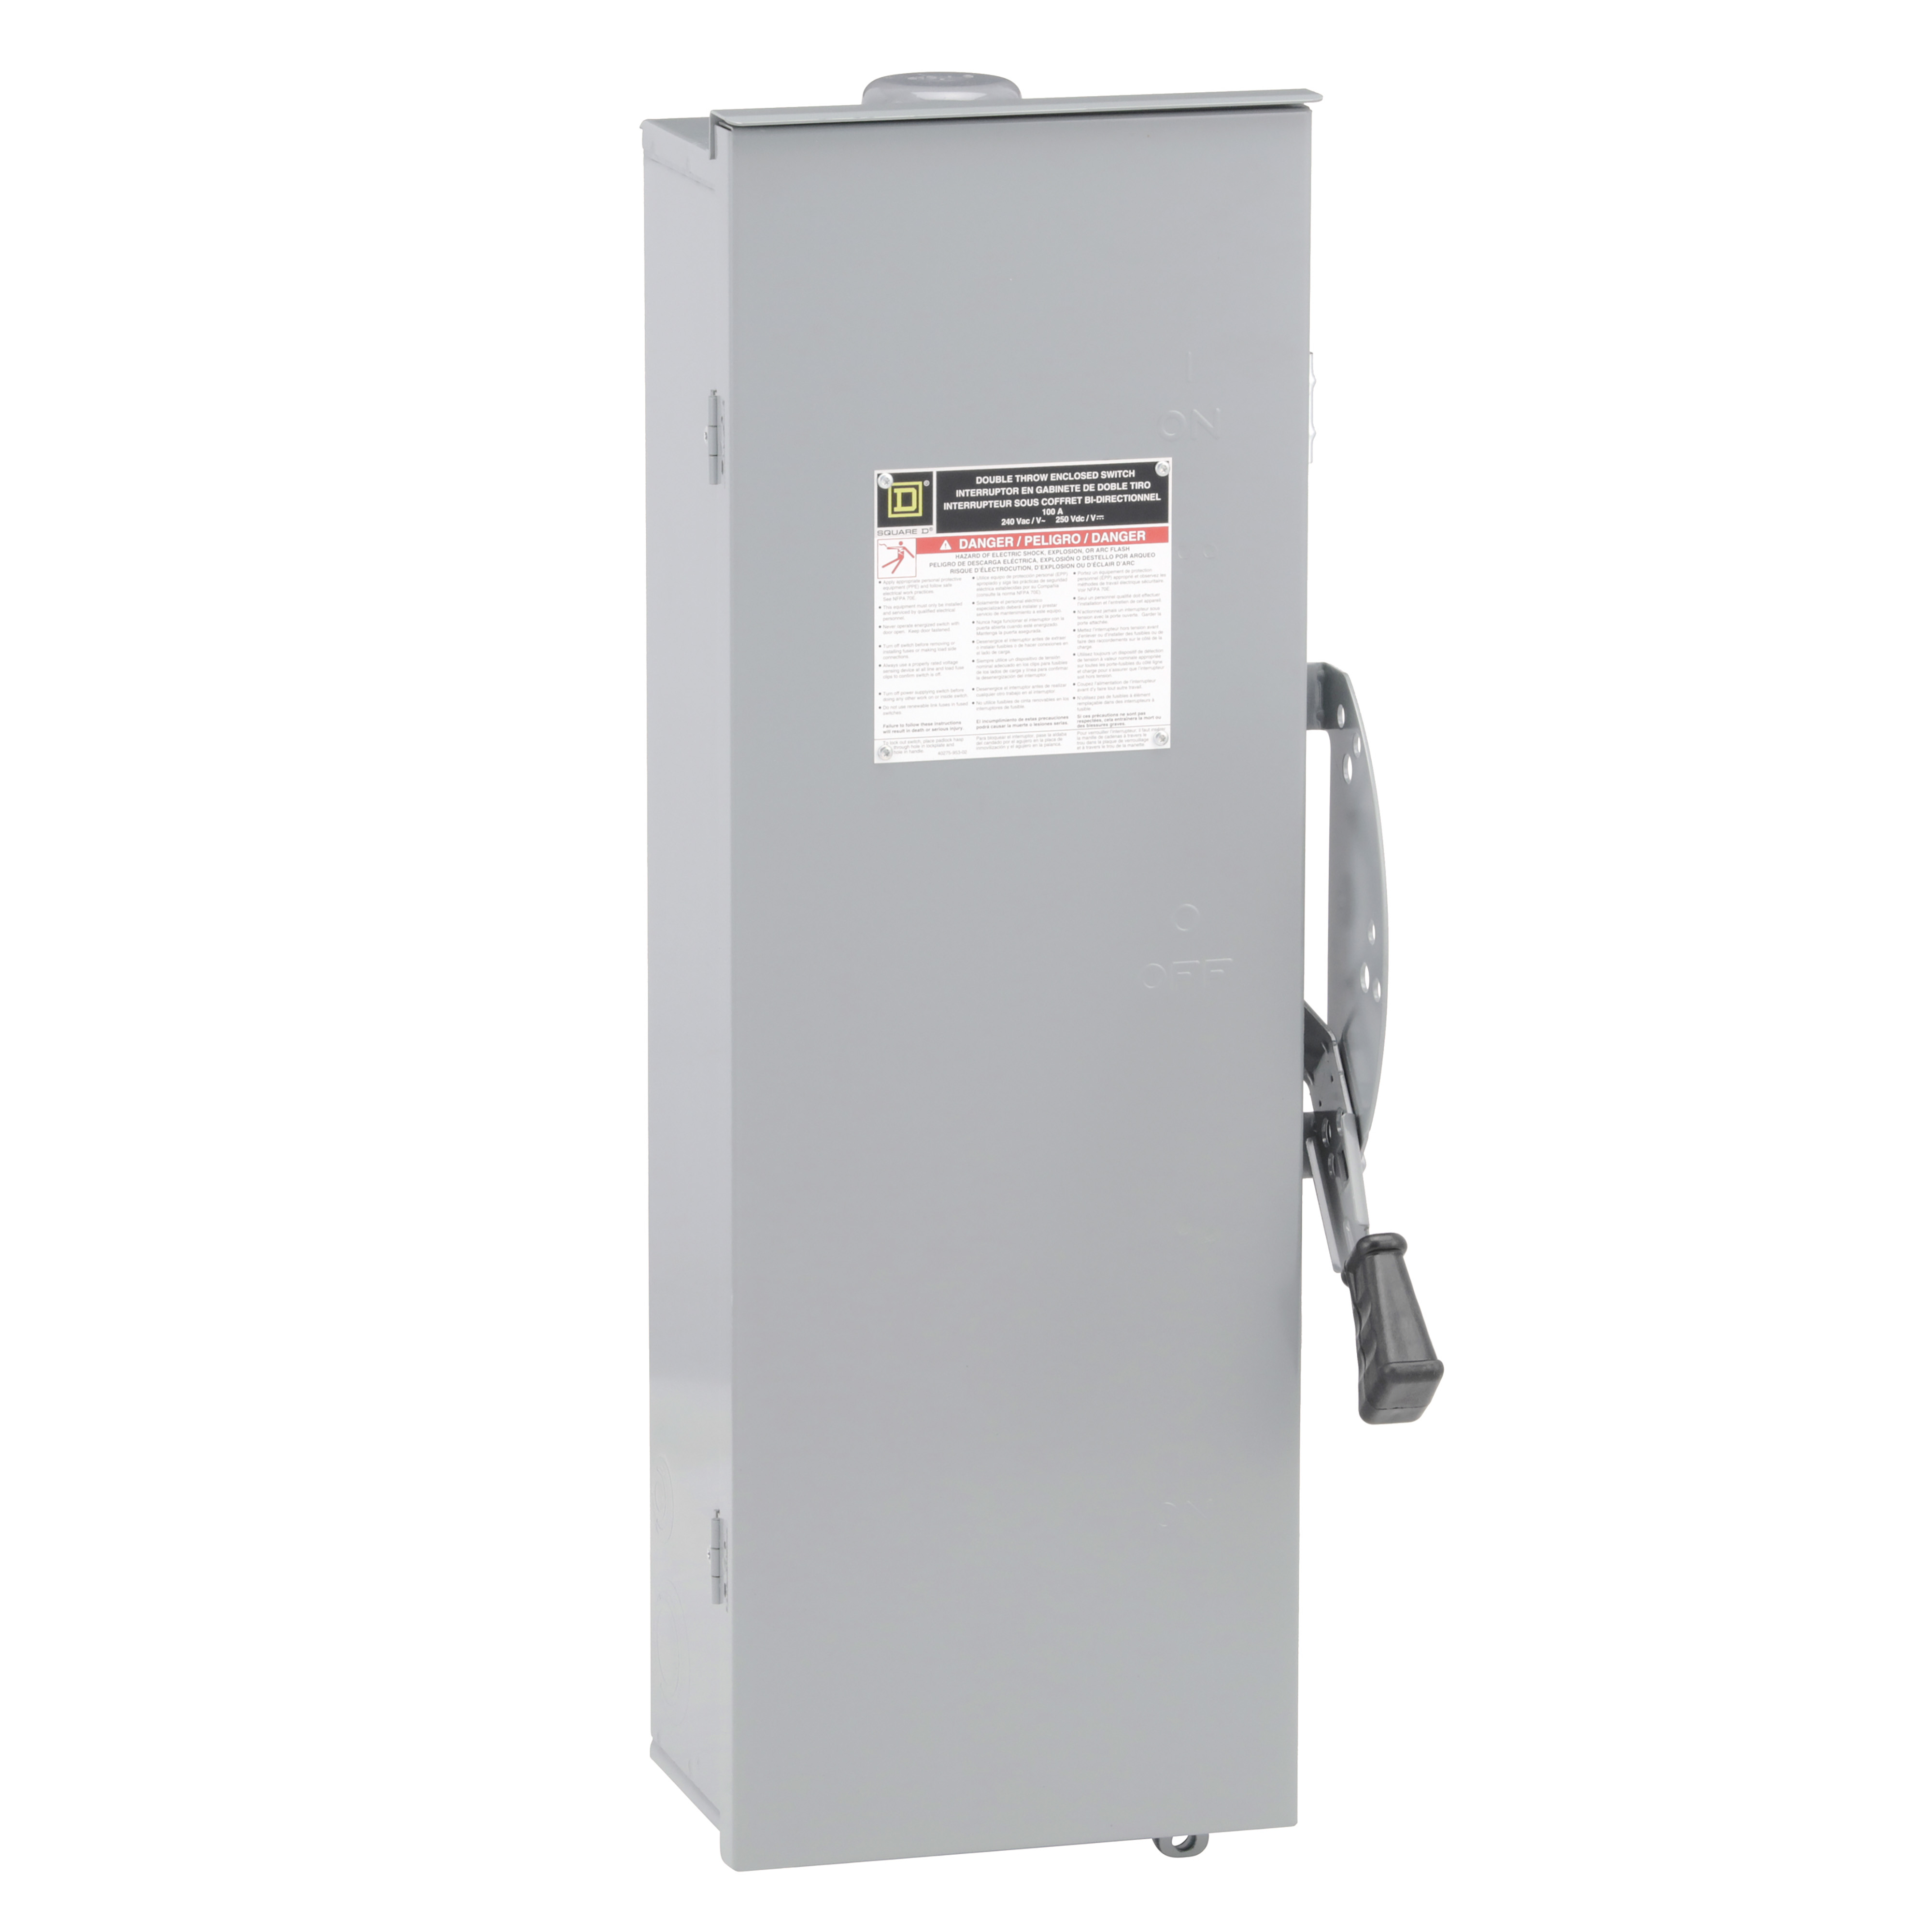 Safety switch, double throw, non fusible, 100A, 240VAC, 250VDC, 2 pole, 20HP, NEMA 3R, bolt on provision